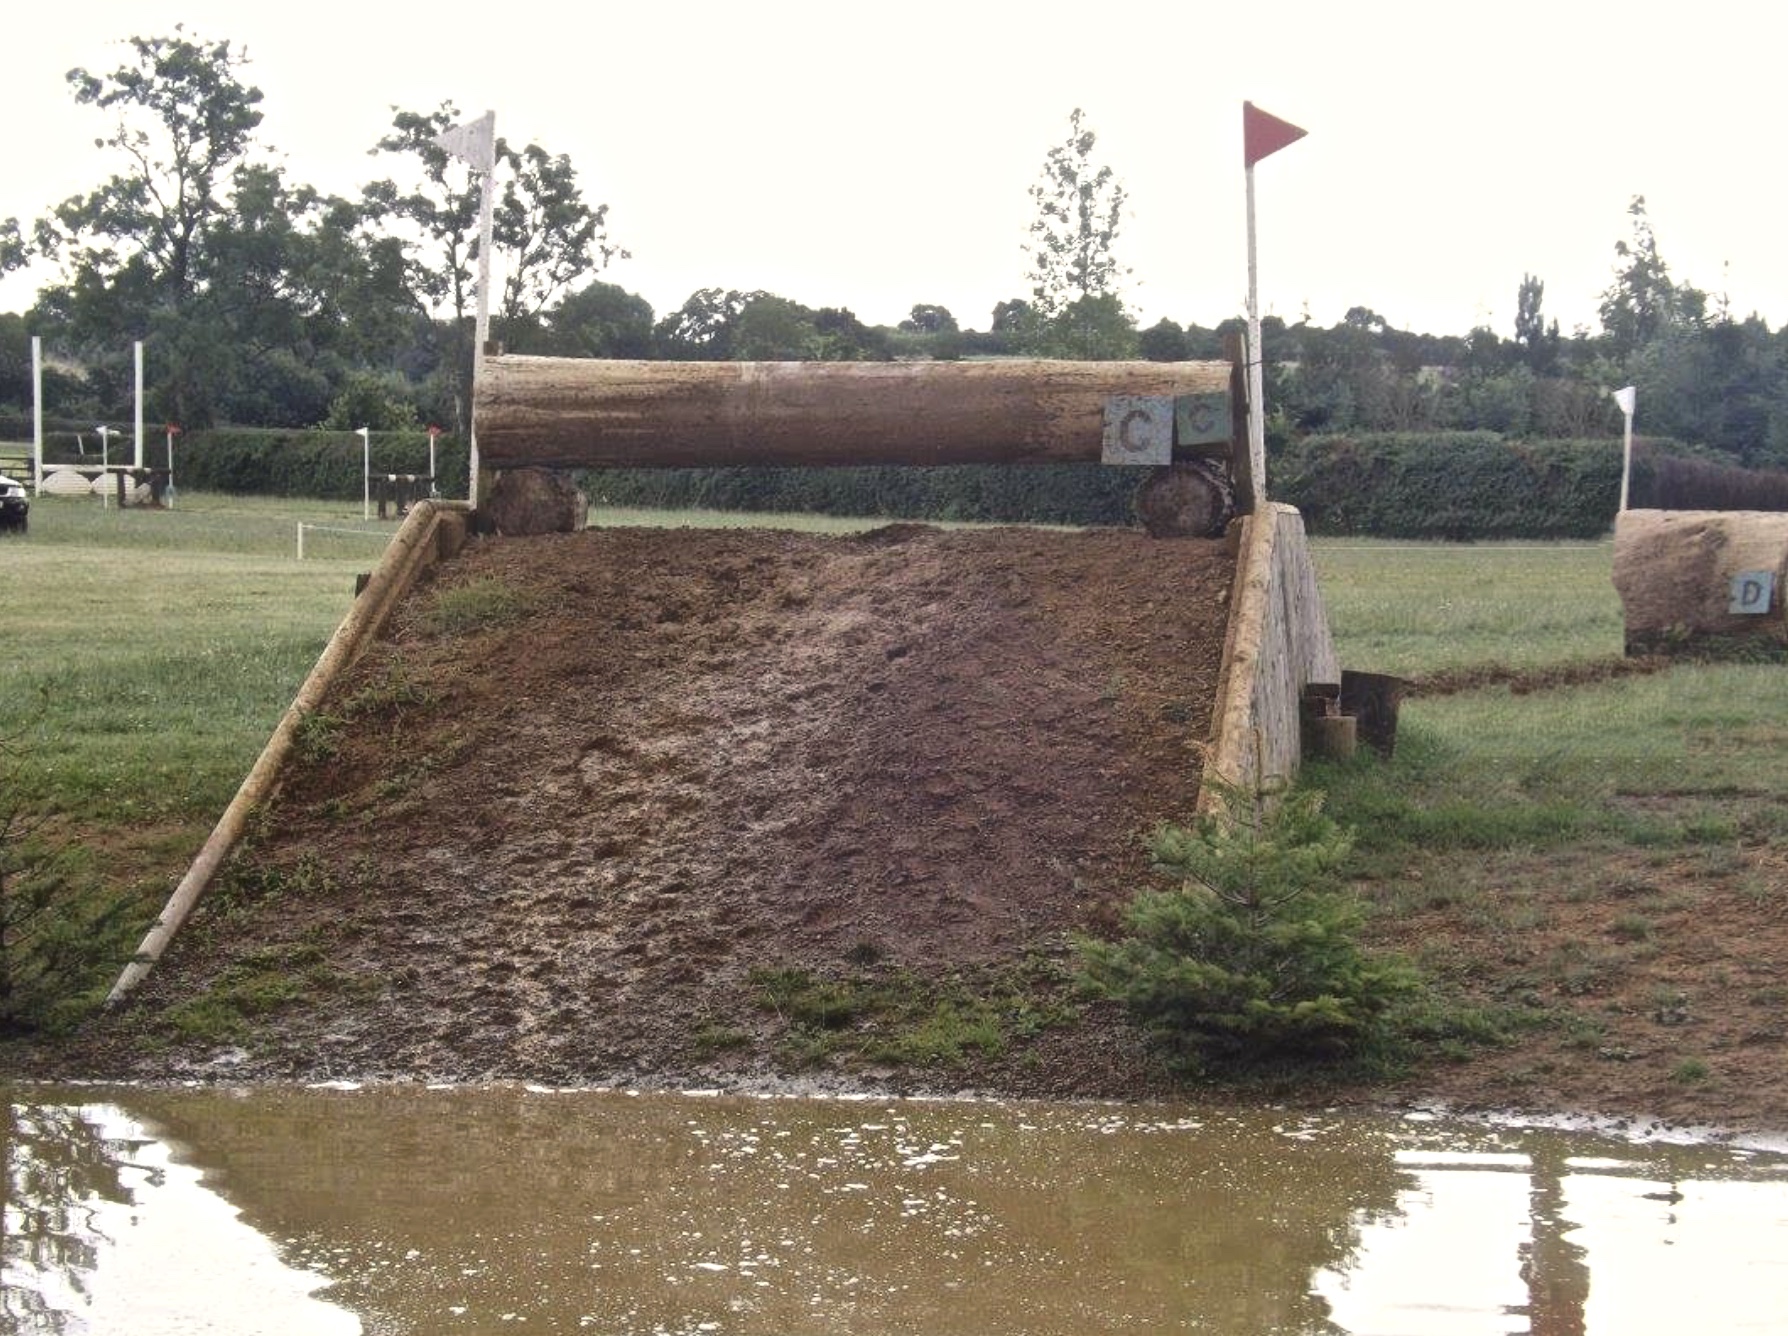 log on ramp out of water